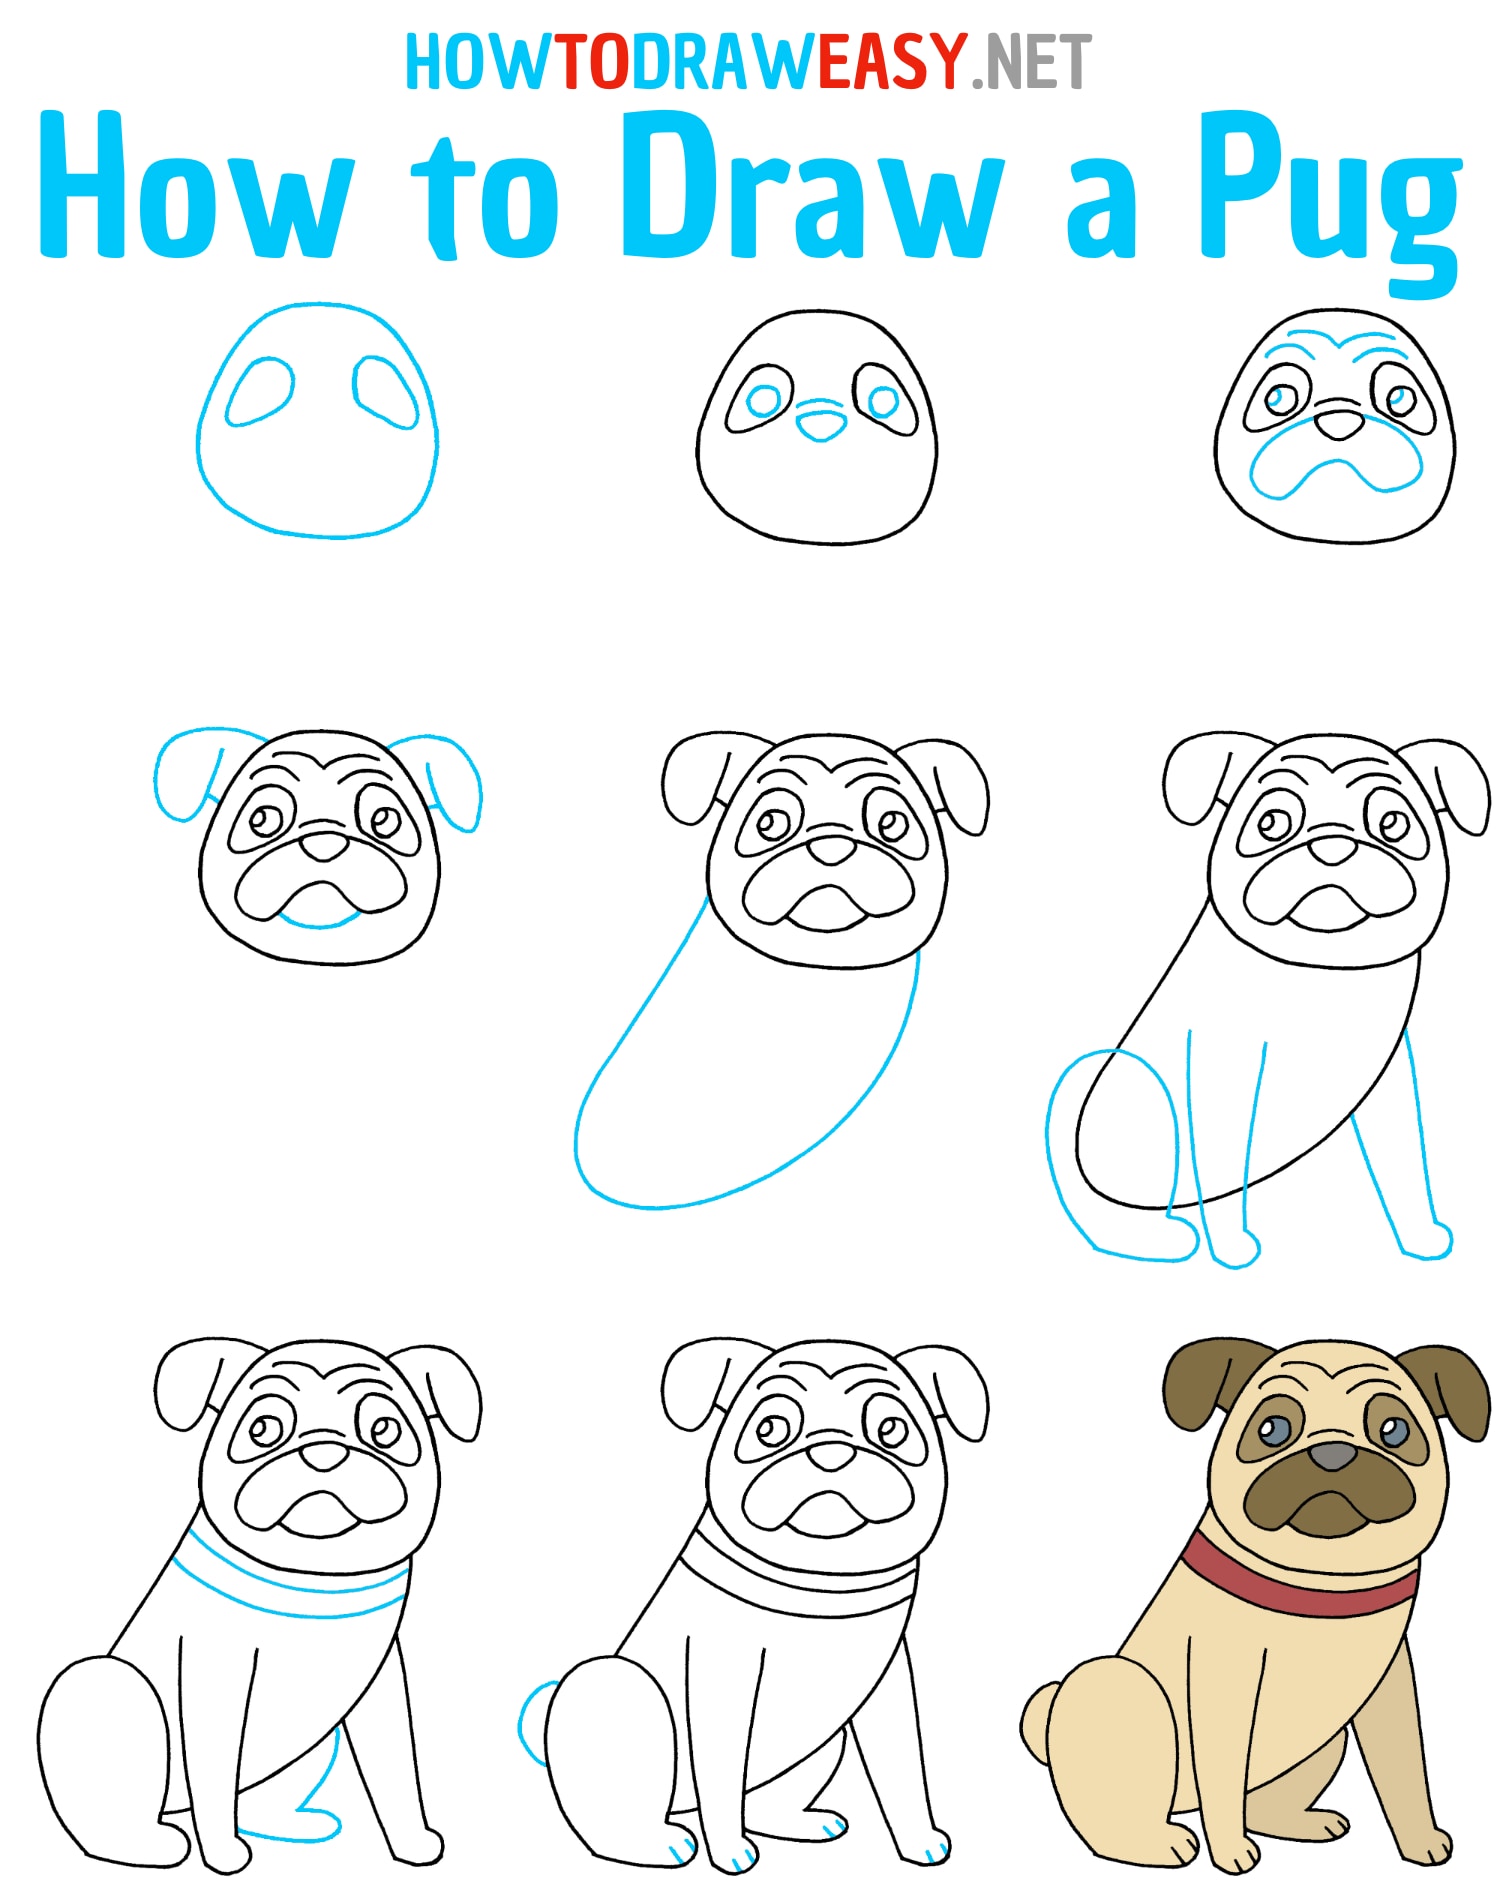 How to Draw a Pug - Draw for Kids